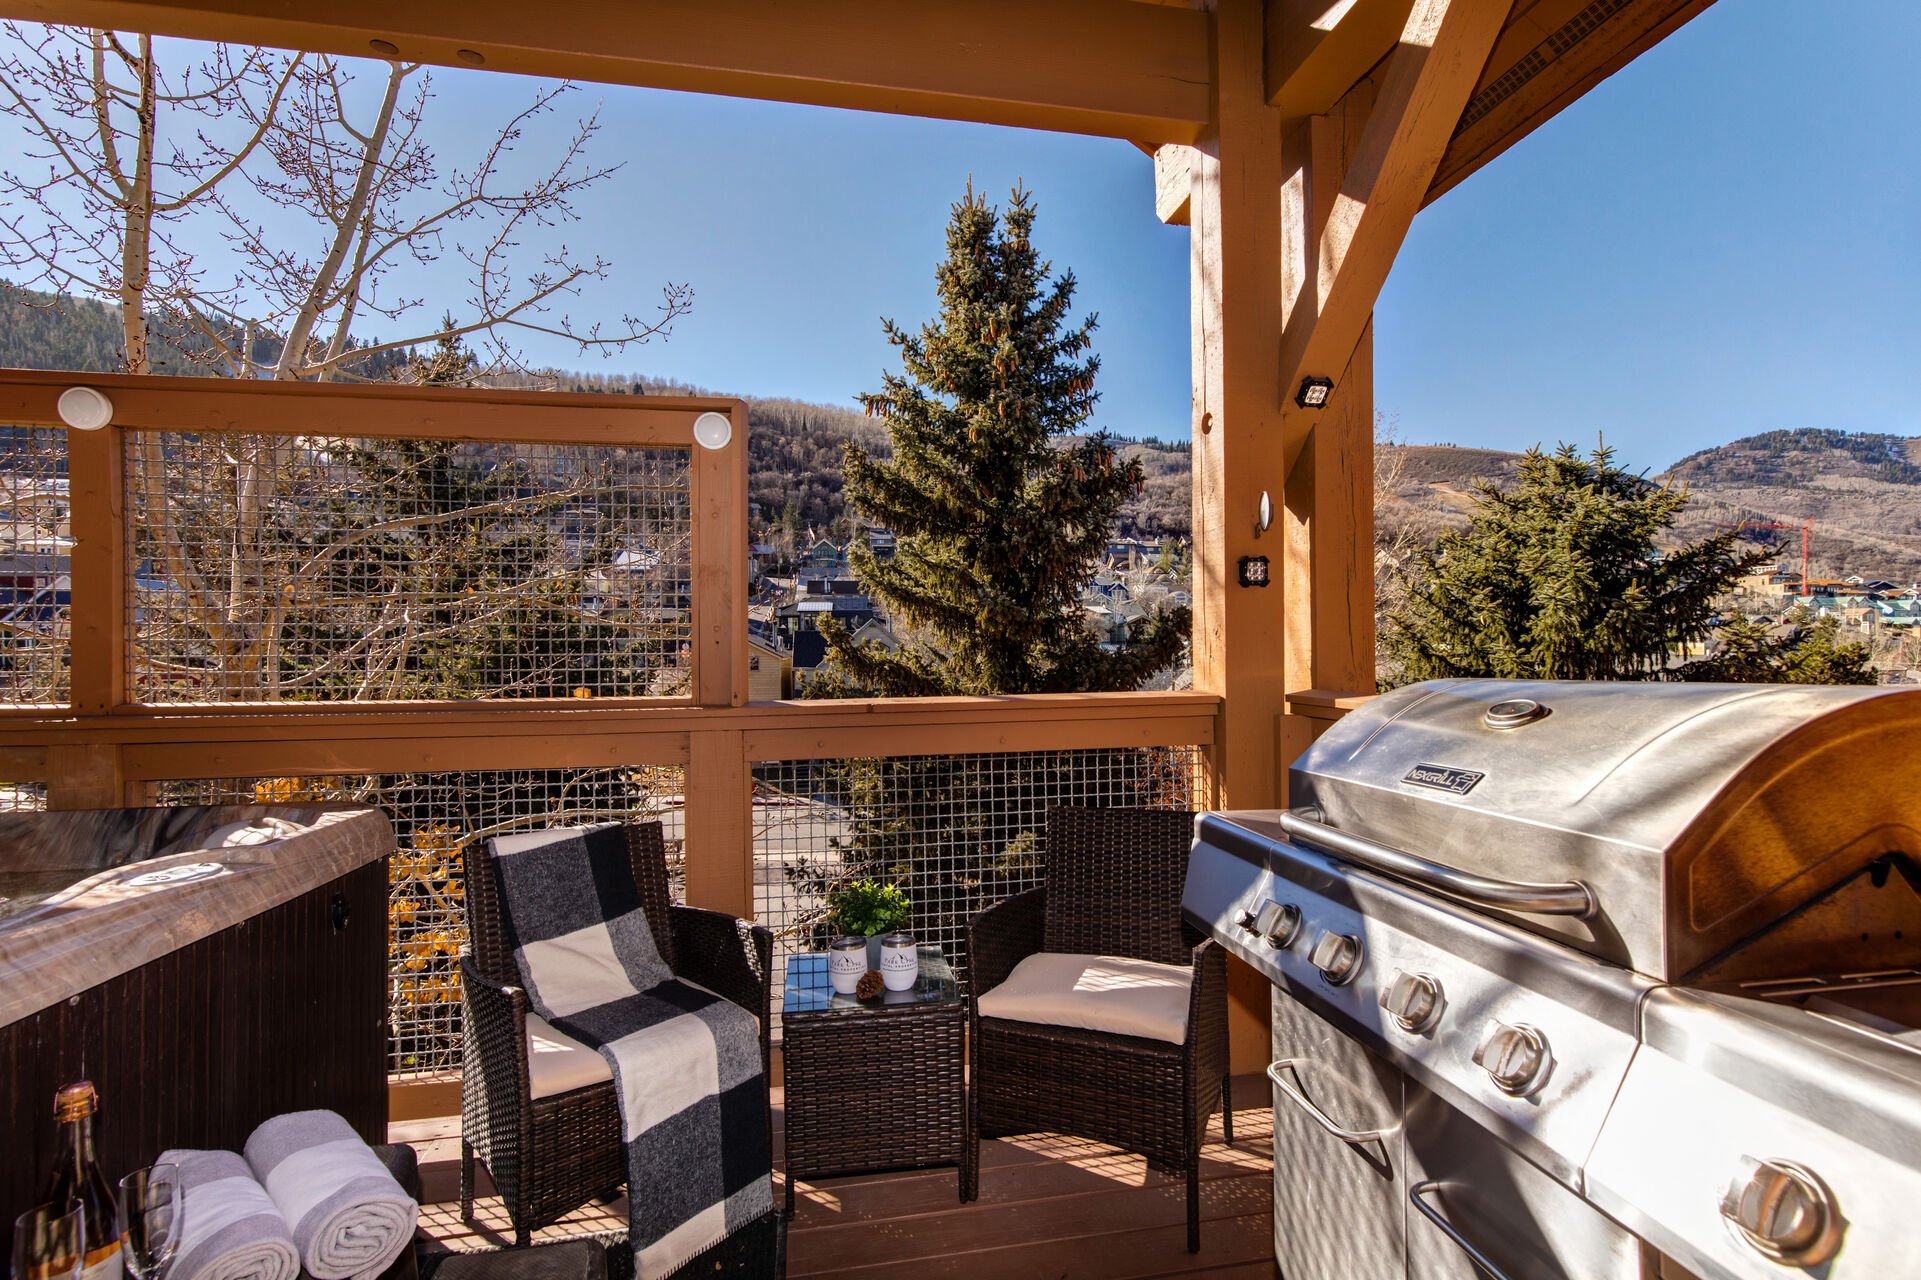 Private balcony off living room with BBQ grill, seating for 2, and hot tub